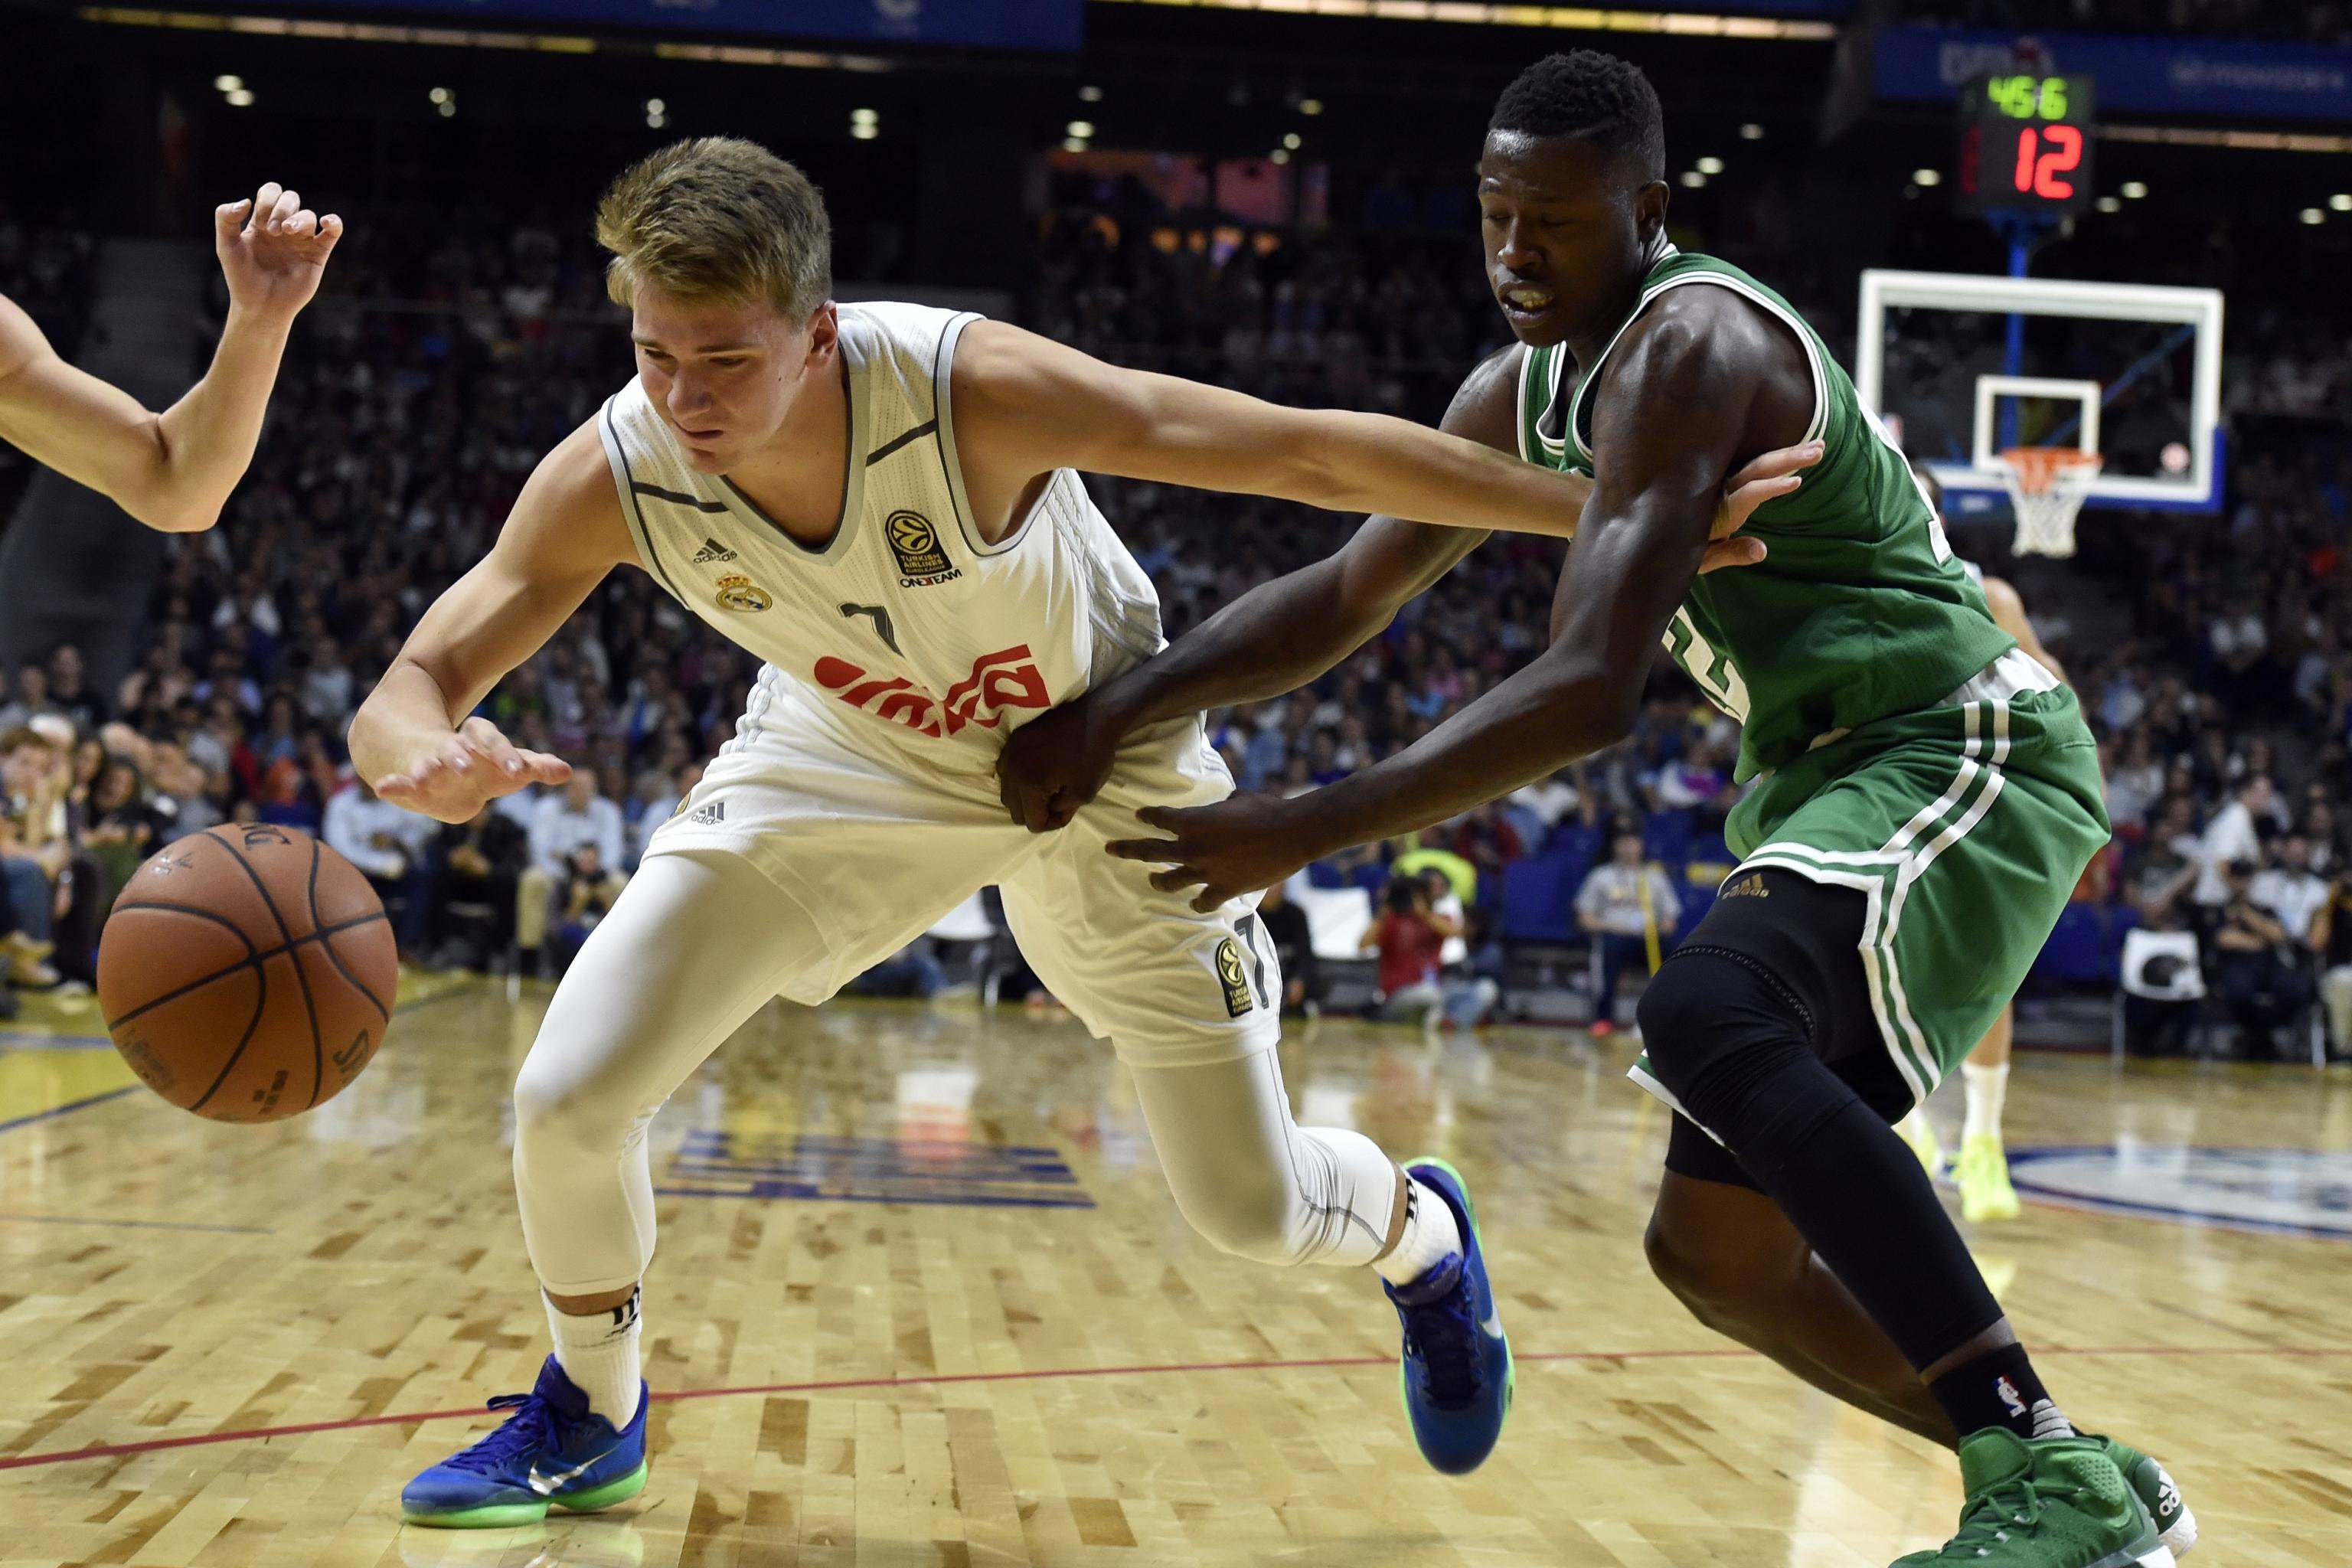 Assist of the night: Luka Doncic, Real Madrid 